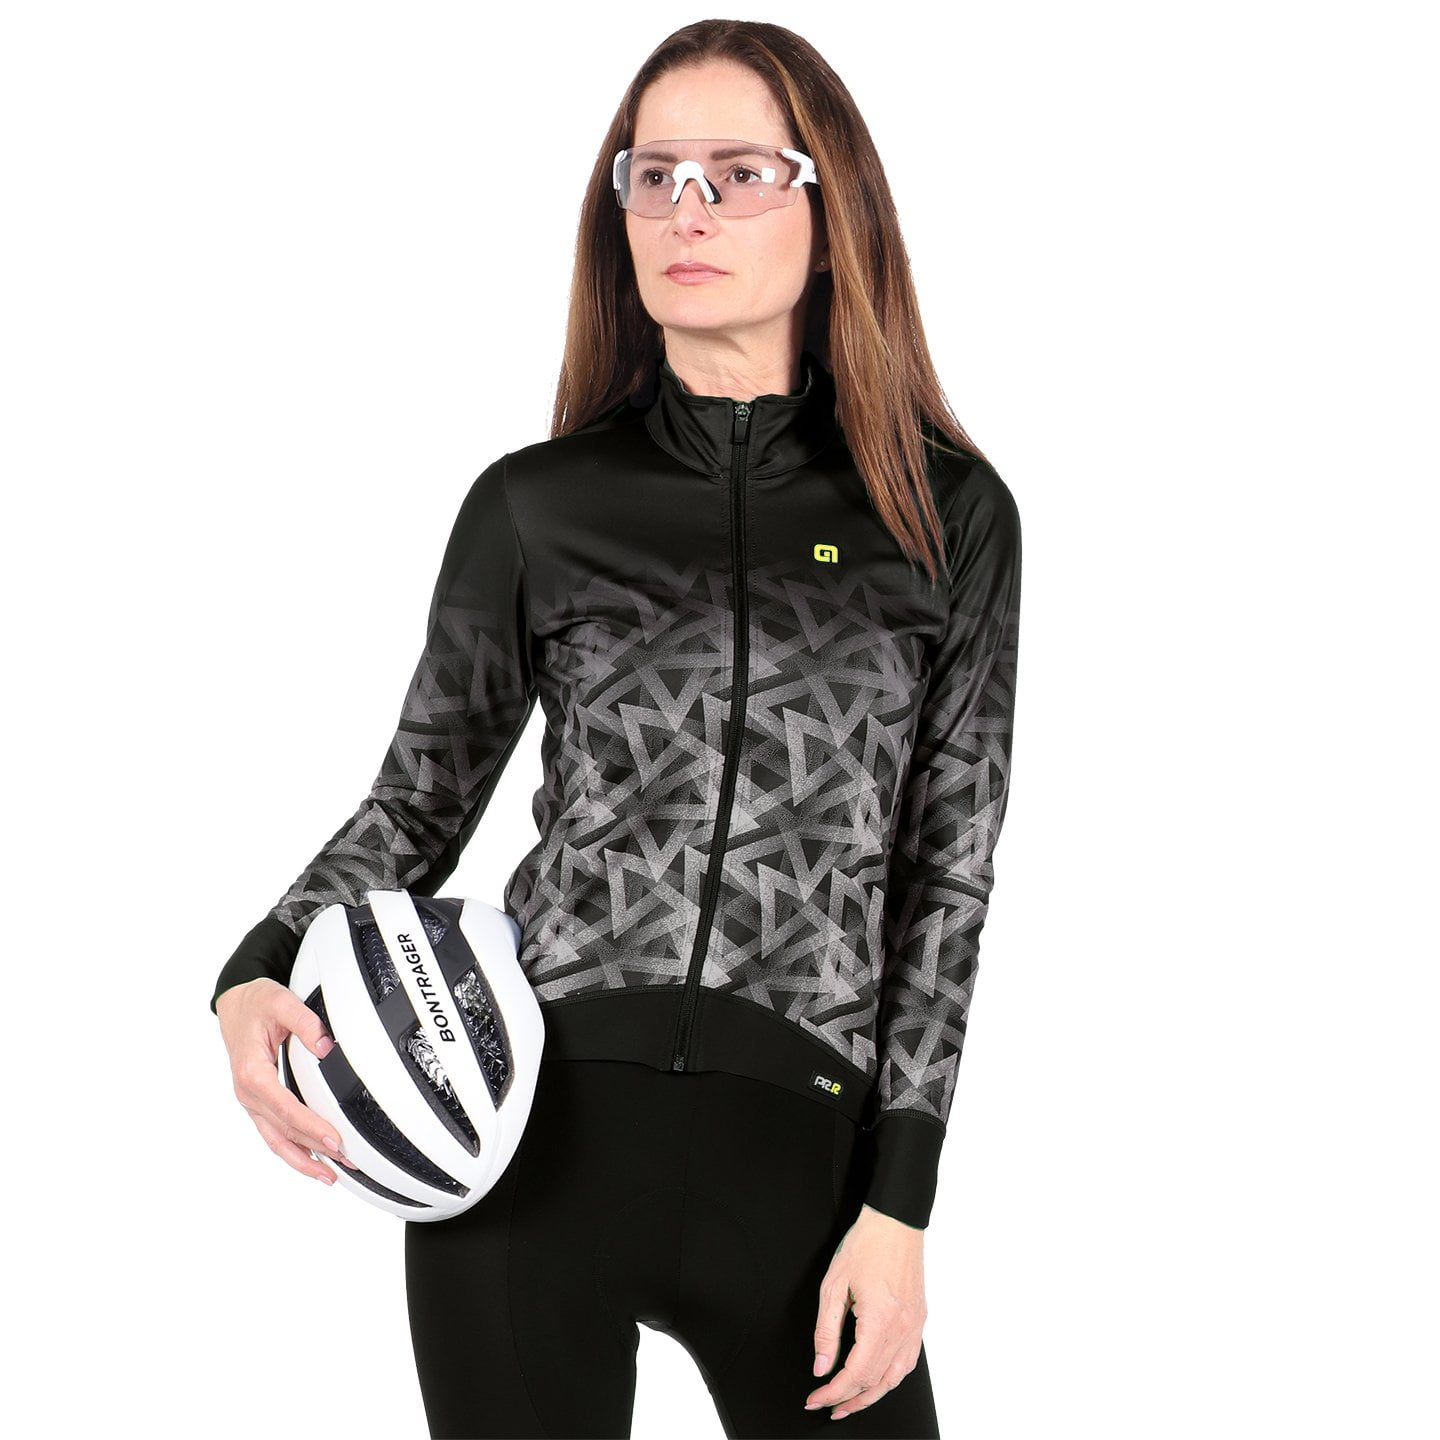 ALE Pyramid Women’s Winter Jacket Women’s Thermal Jacket, size L, Winter jacket, Cycling clothing